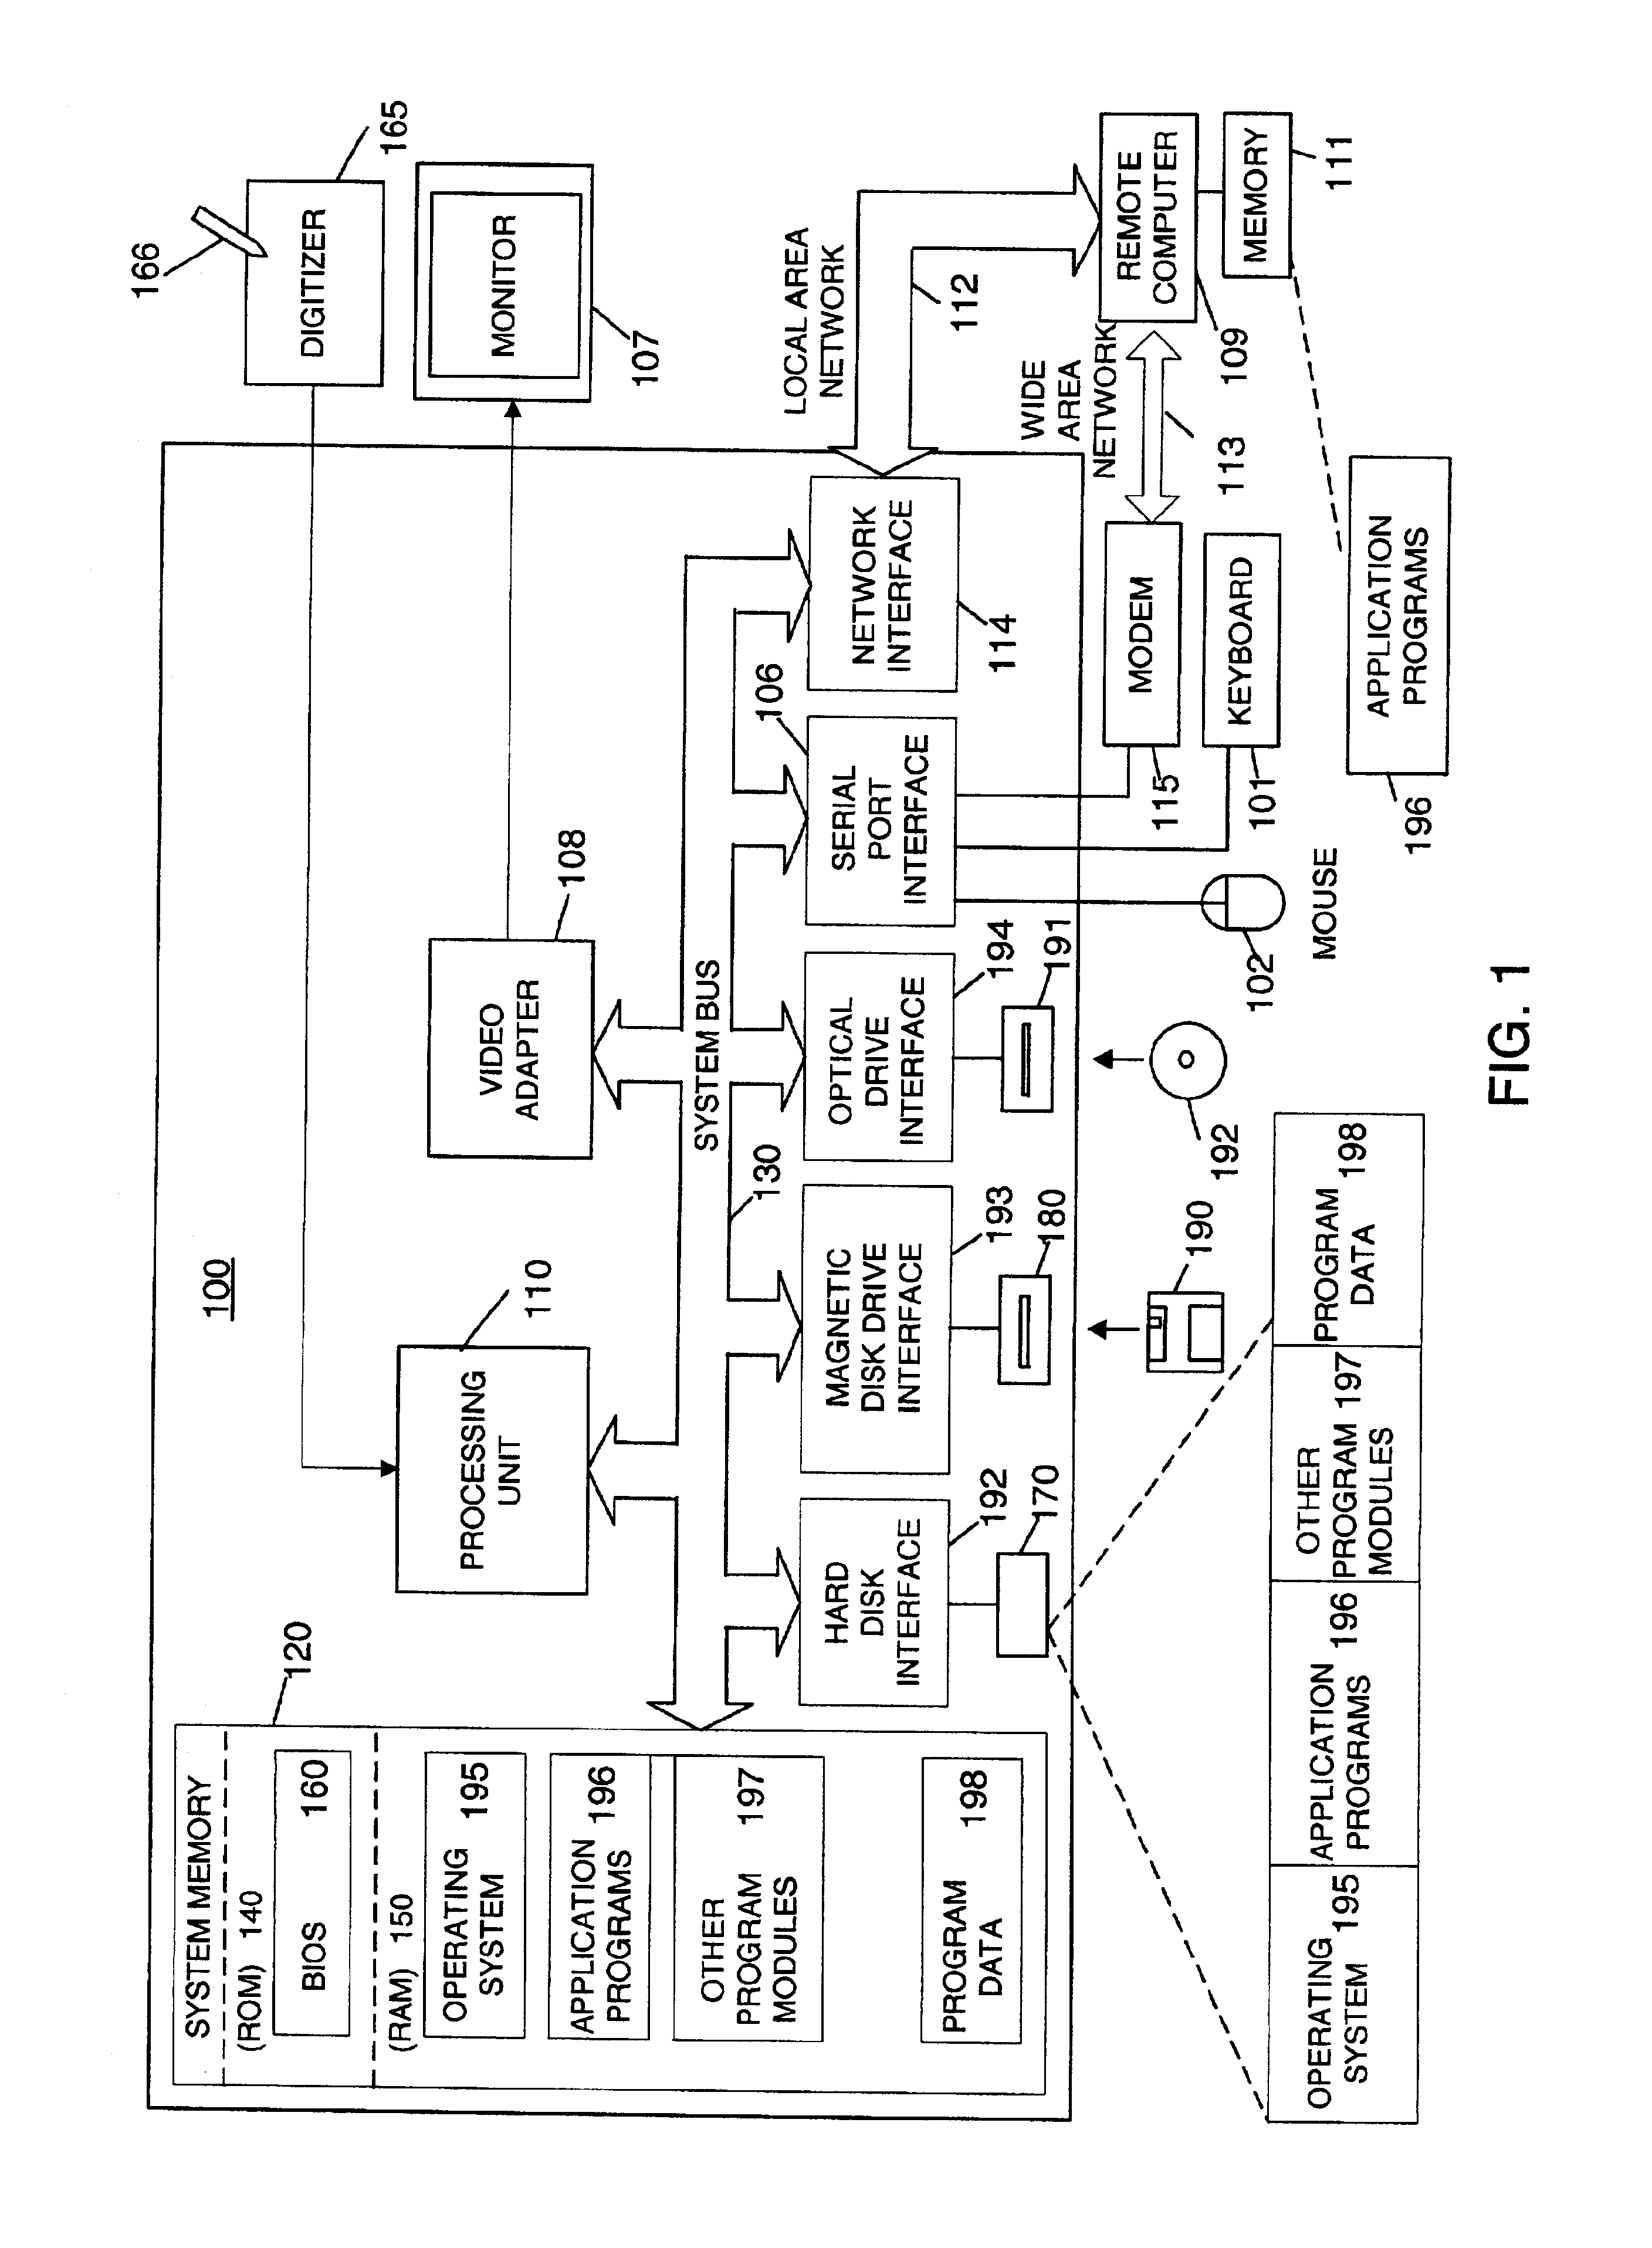 Method and apparatus for managing input focus and z-order